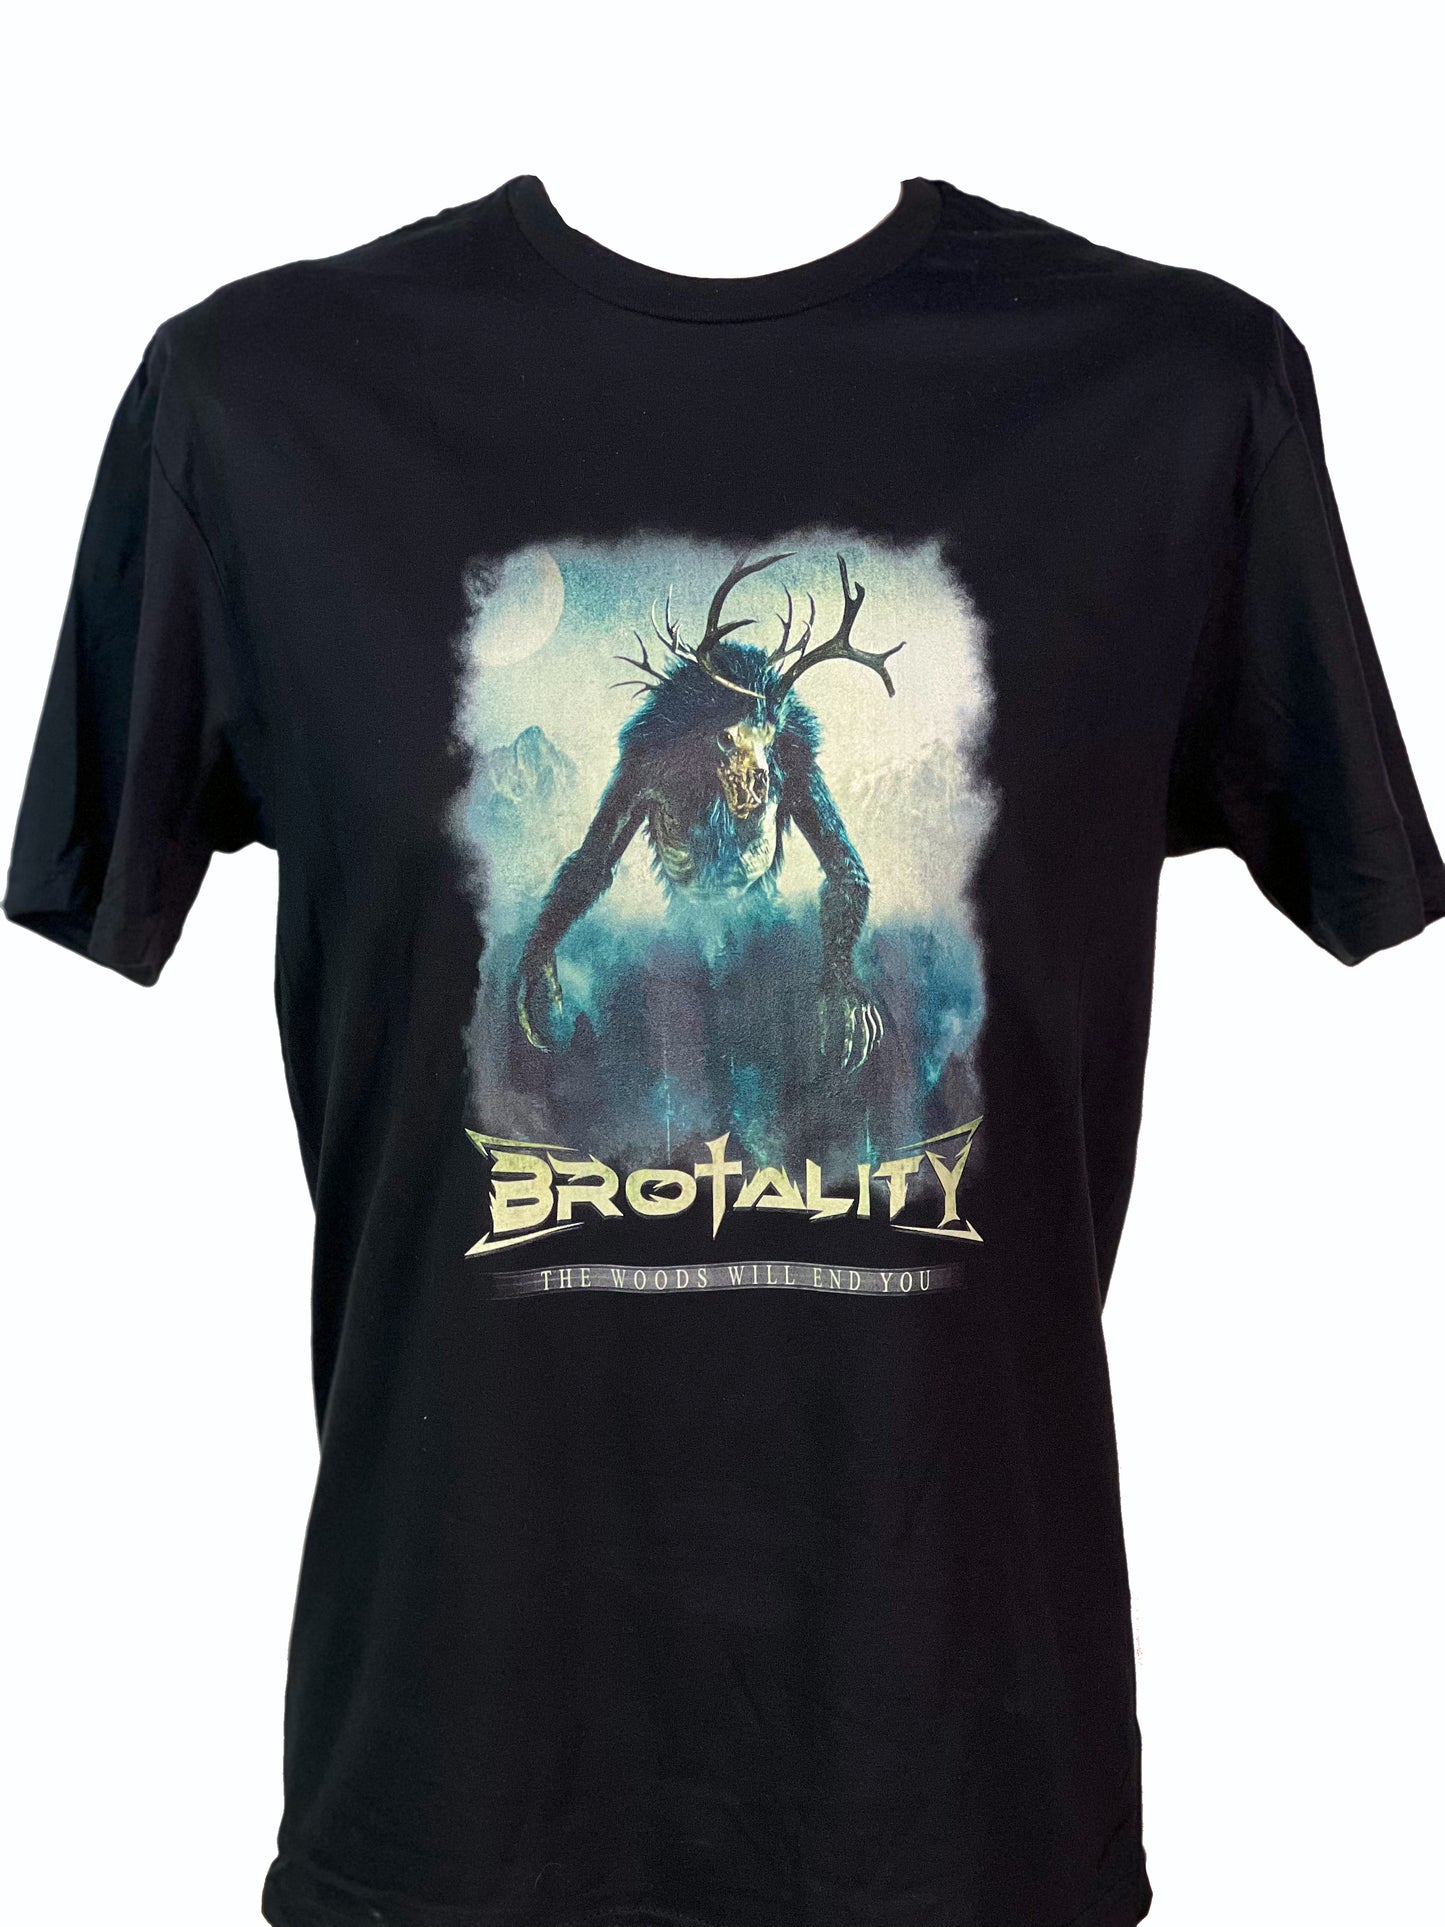 Brotality - The Woods Will End You T-Shirt